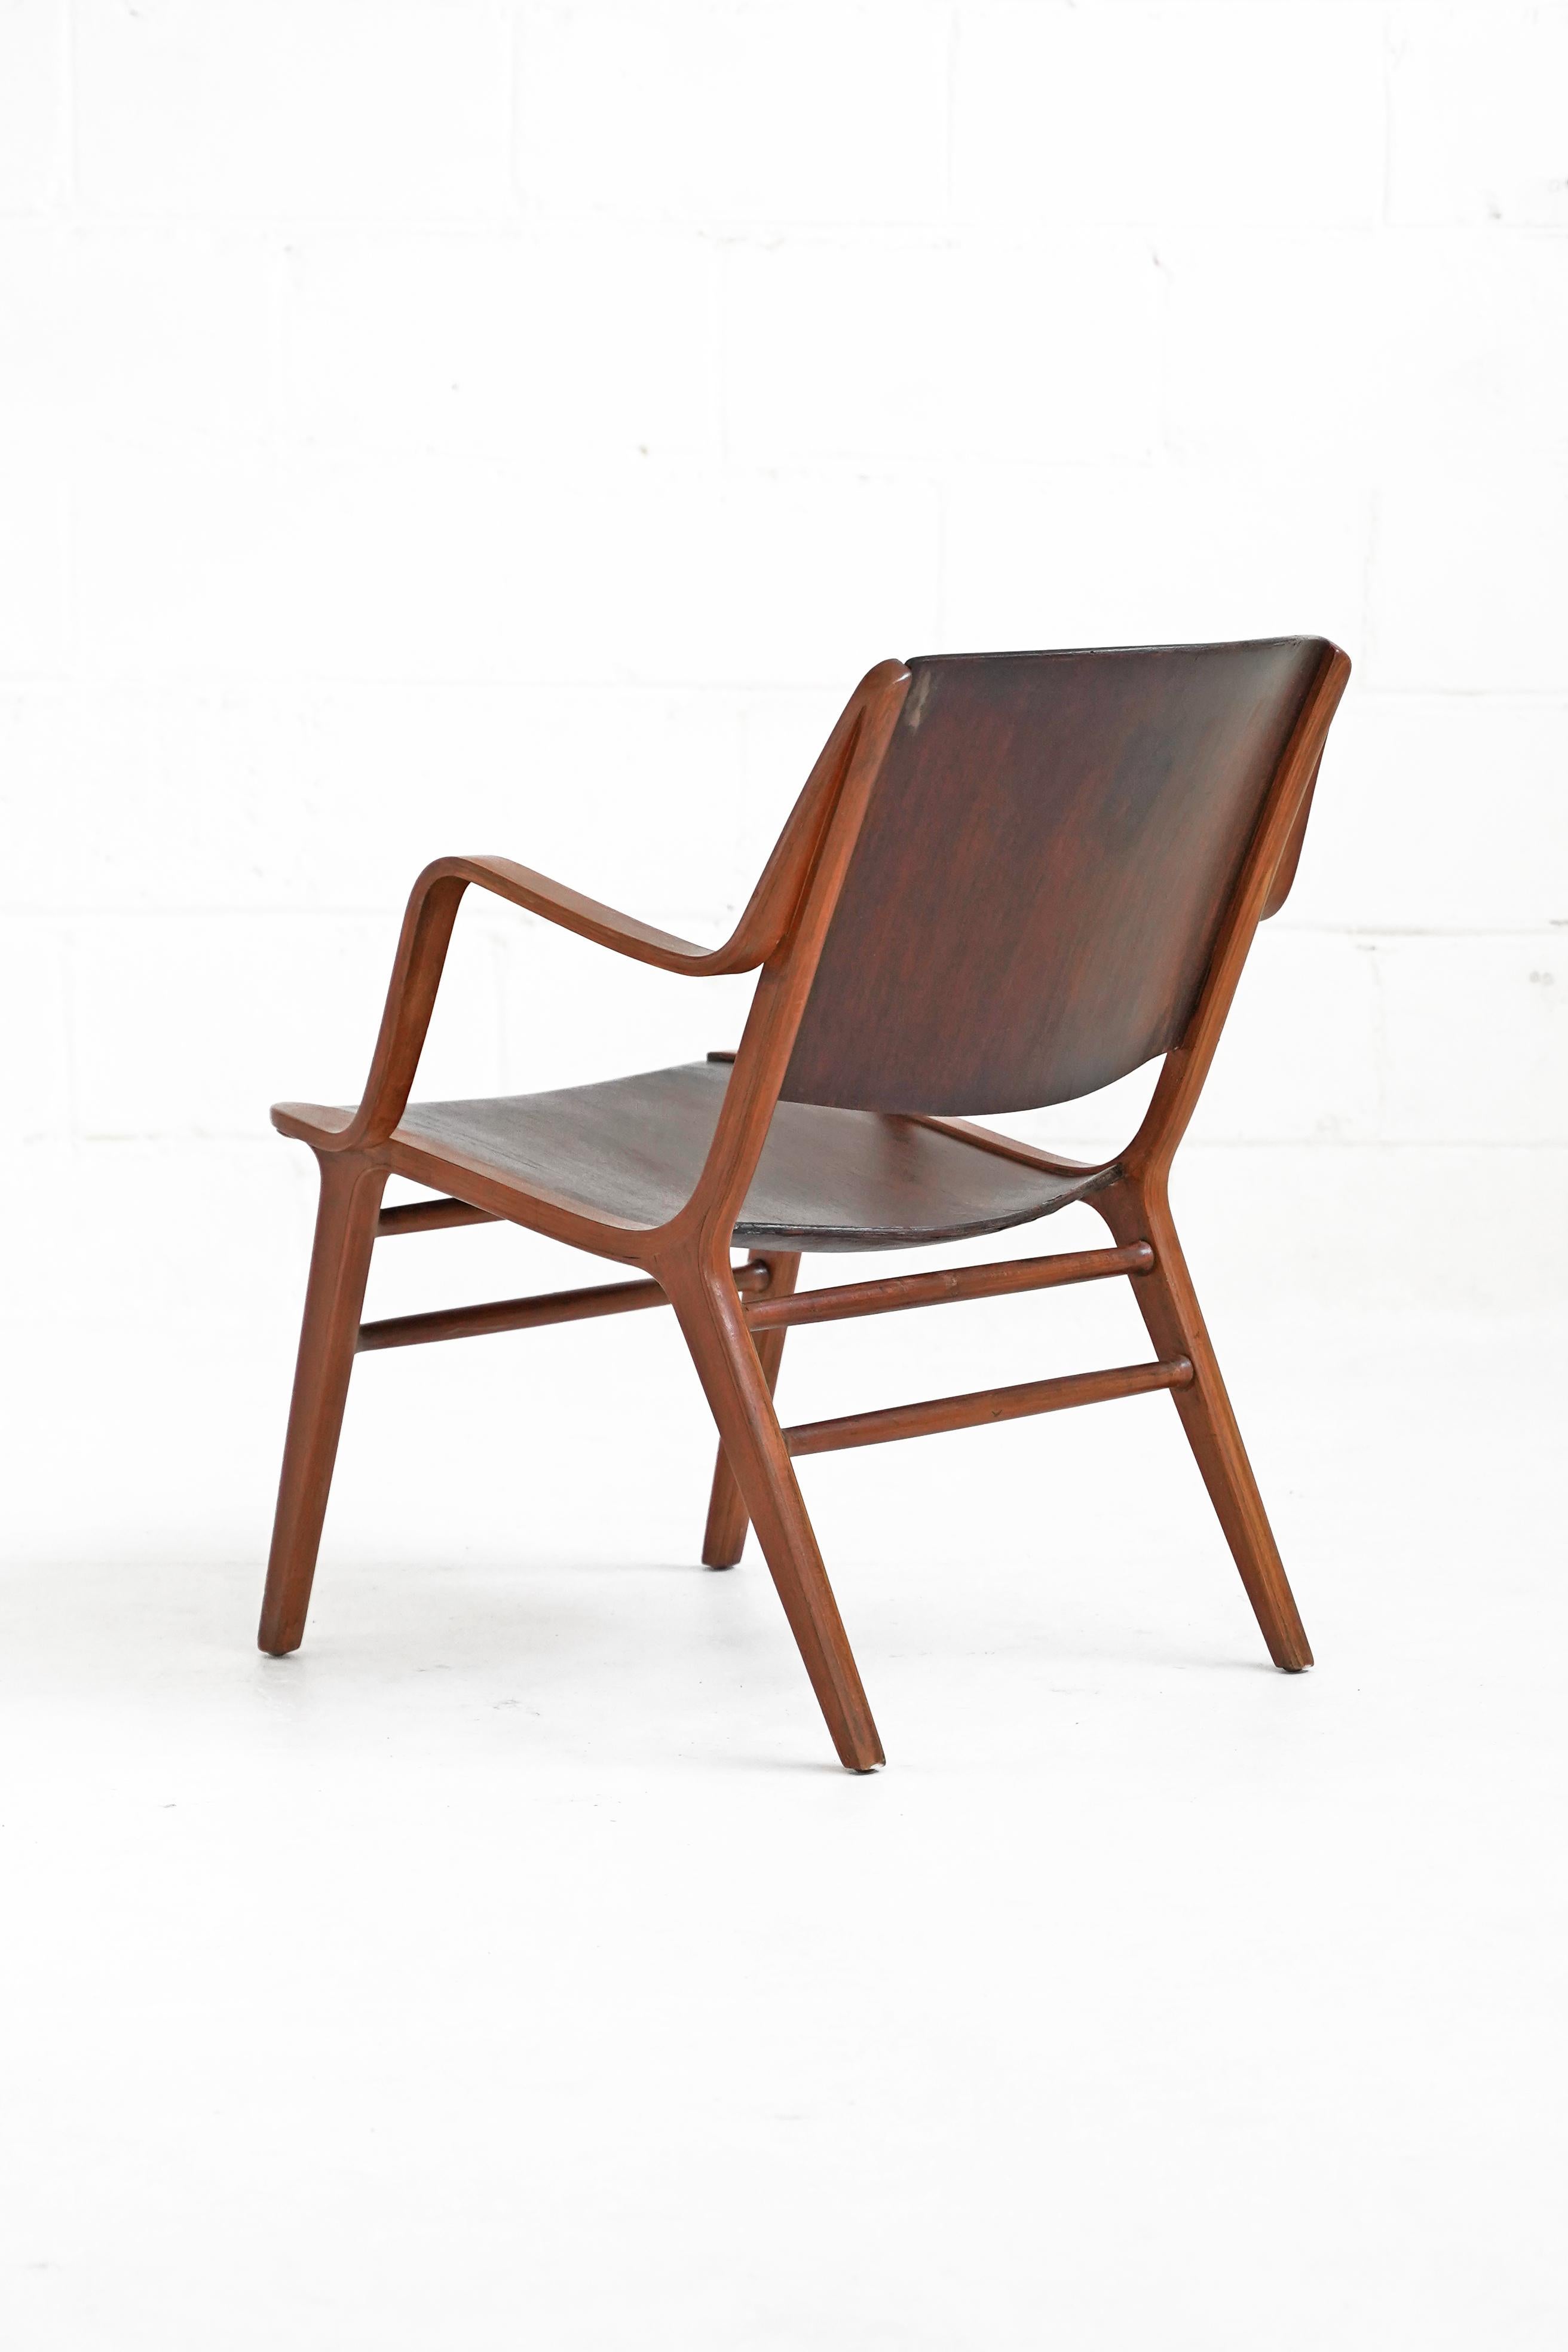 Stunning easy chair by Peter Hvidt and Orla Mølgaard-Nielsen with a stained oak seat and backrest and curvilinear teak arms and legs. A rare piece with beautiful bentwood details. In it's original vintage condition with signs of wear shown in photos.